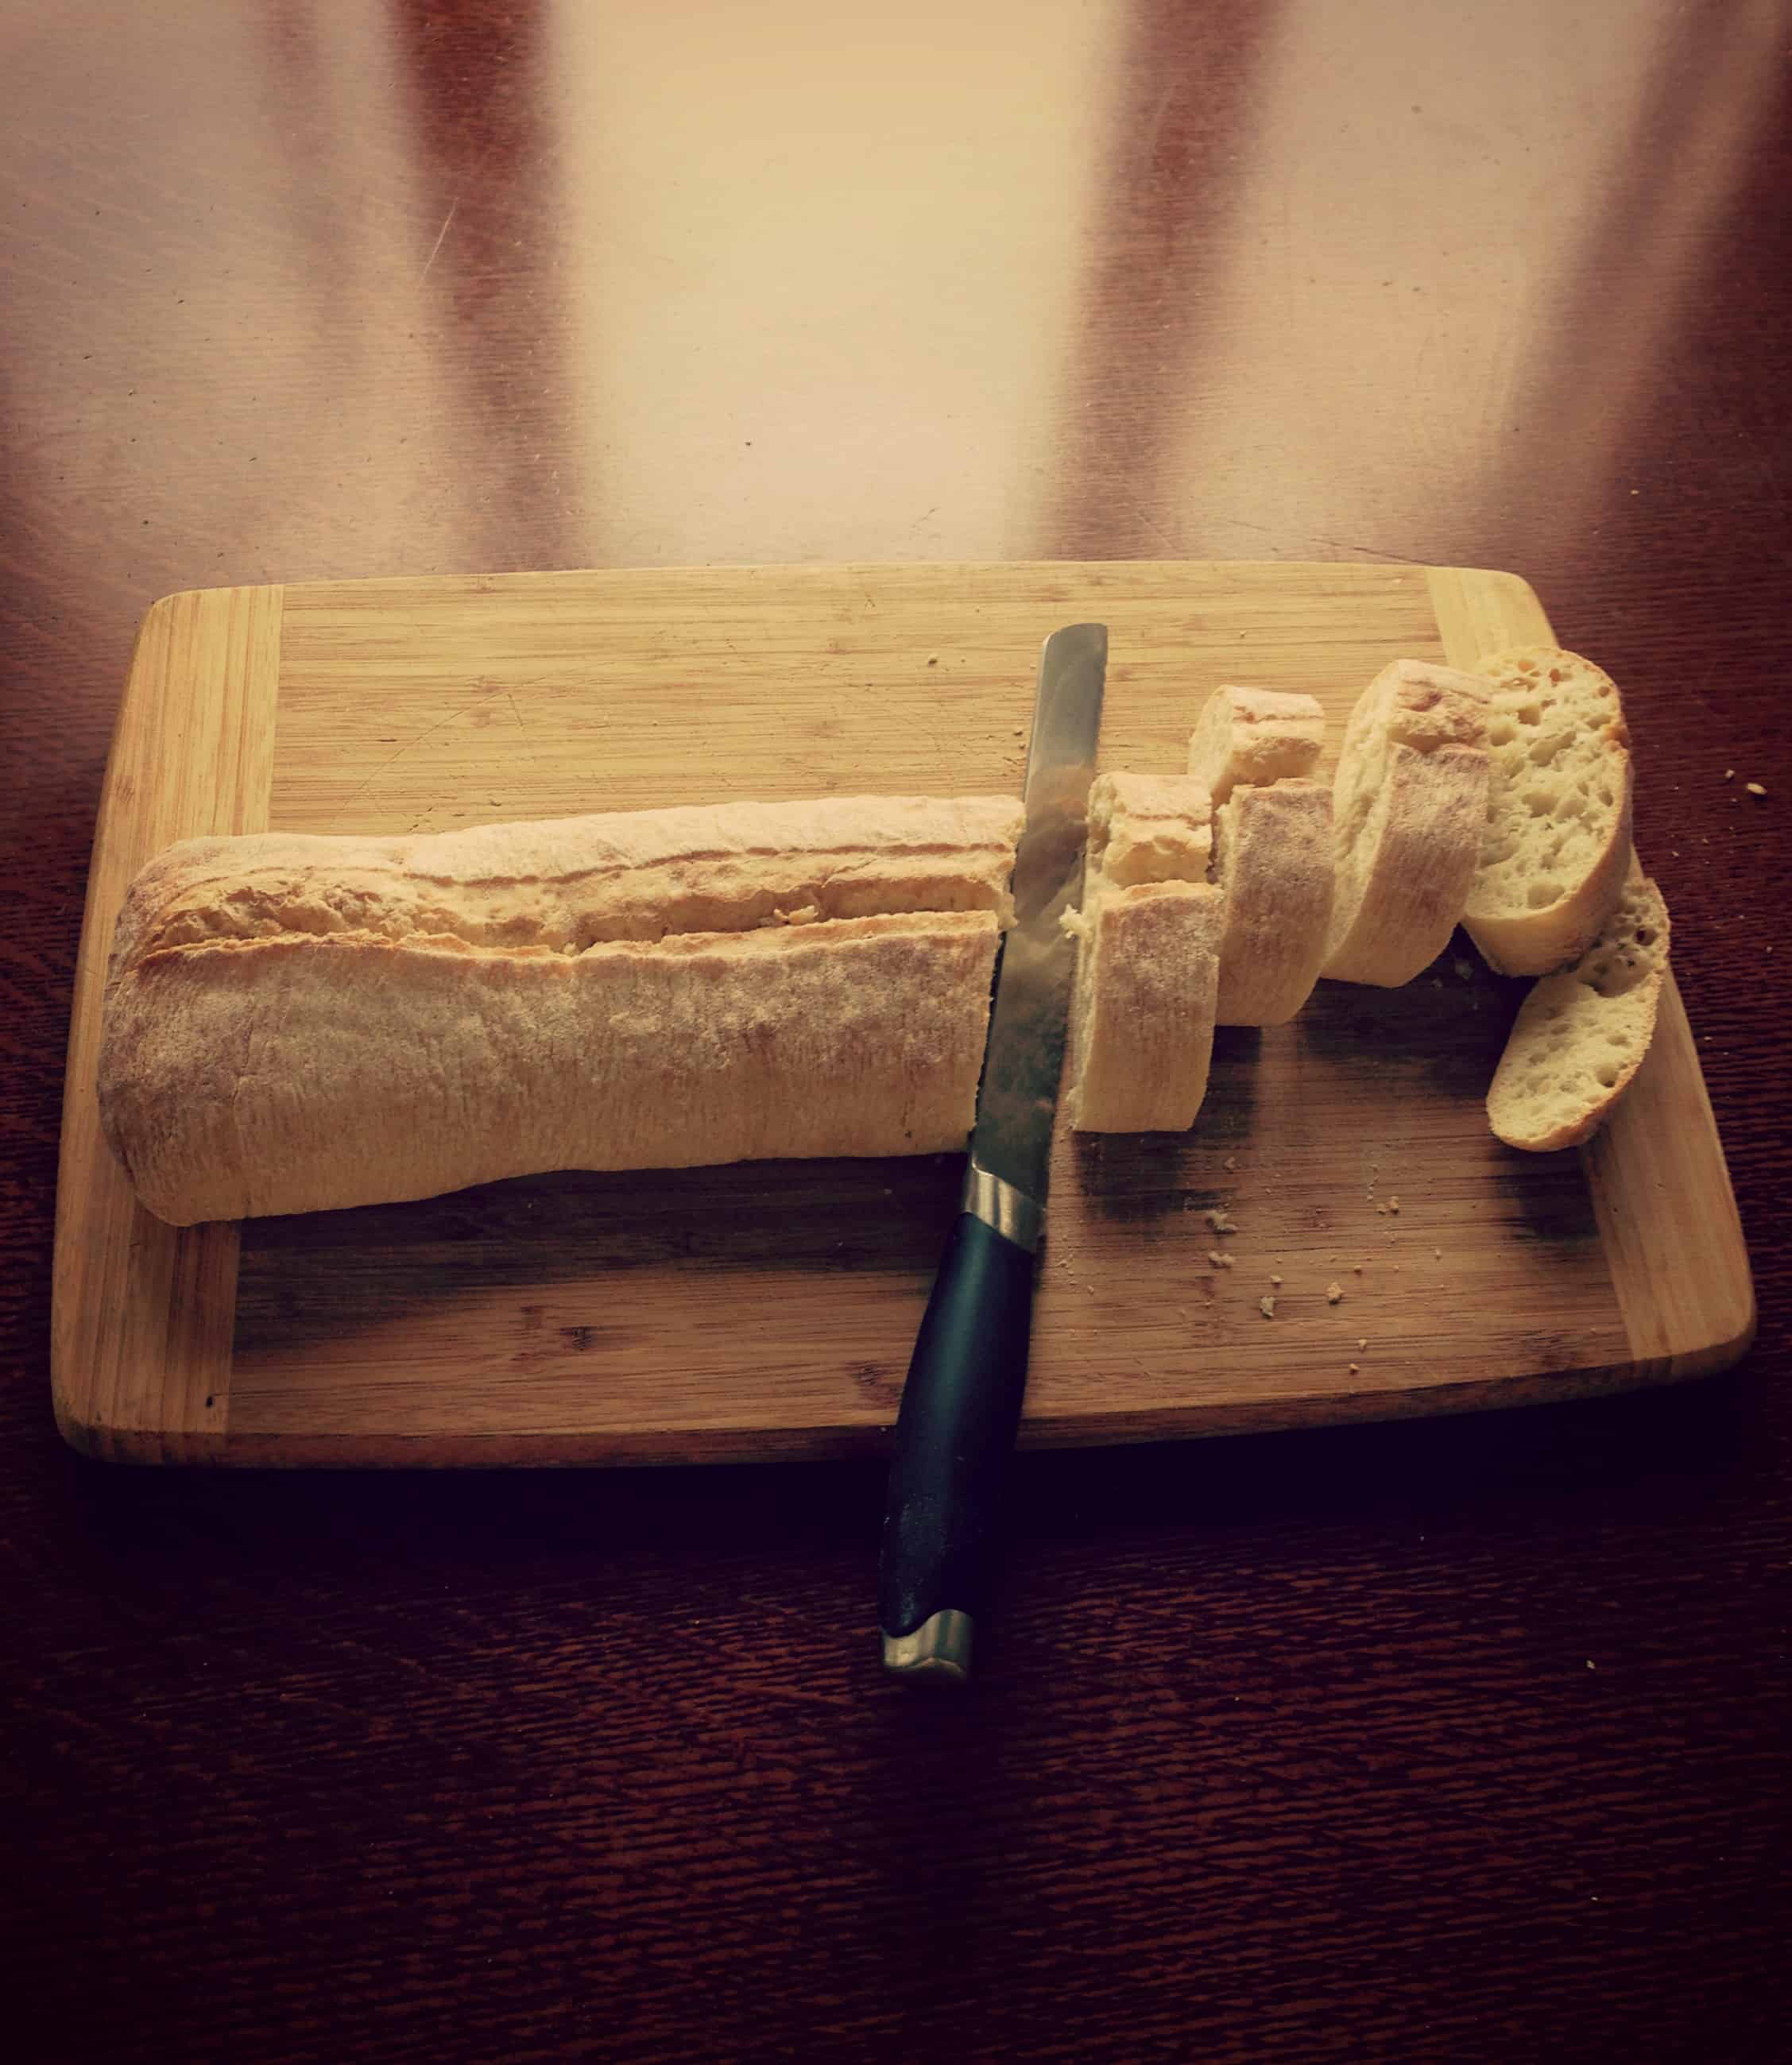 A bread knife and loaf of half sliced baguette on a wood cutting board.